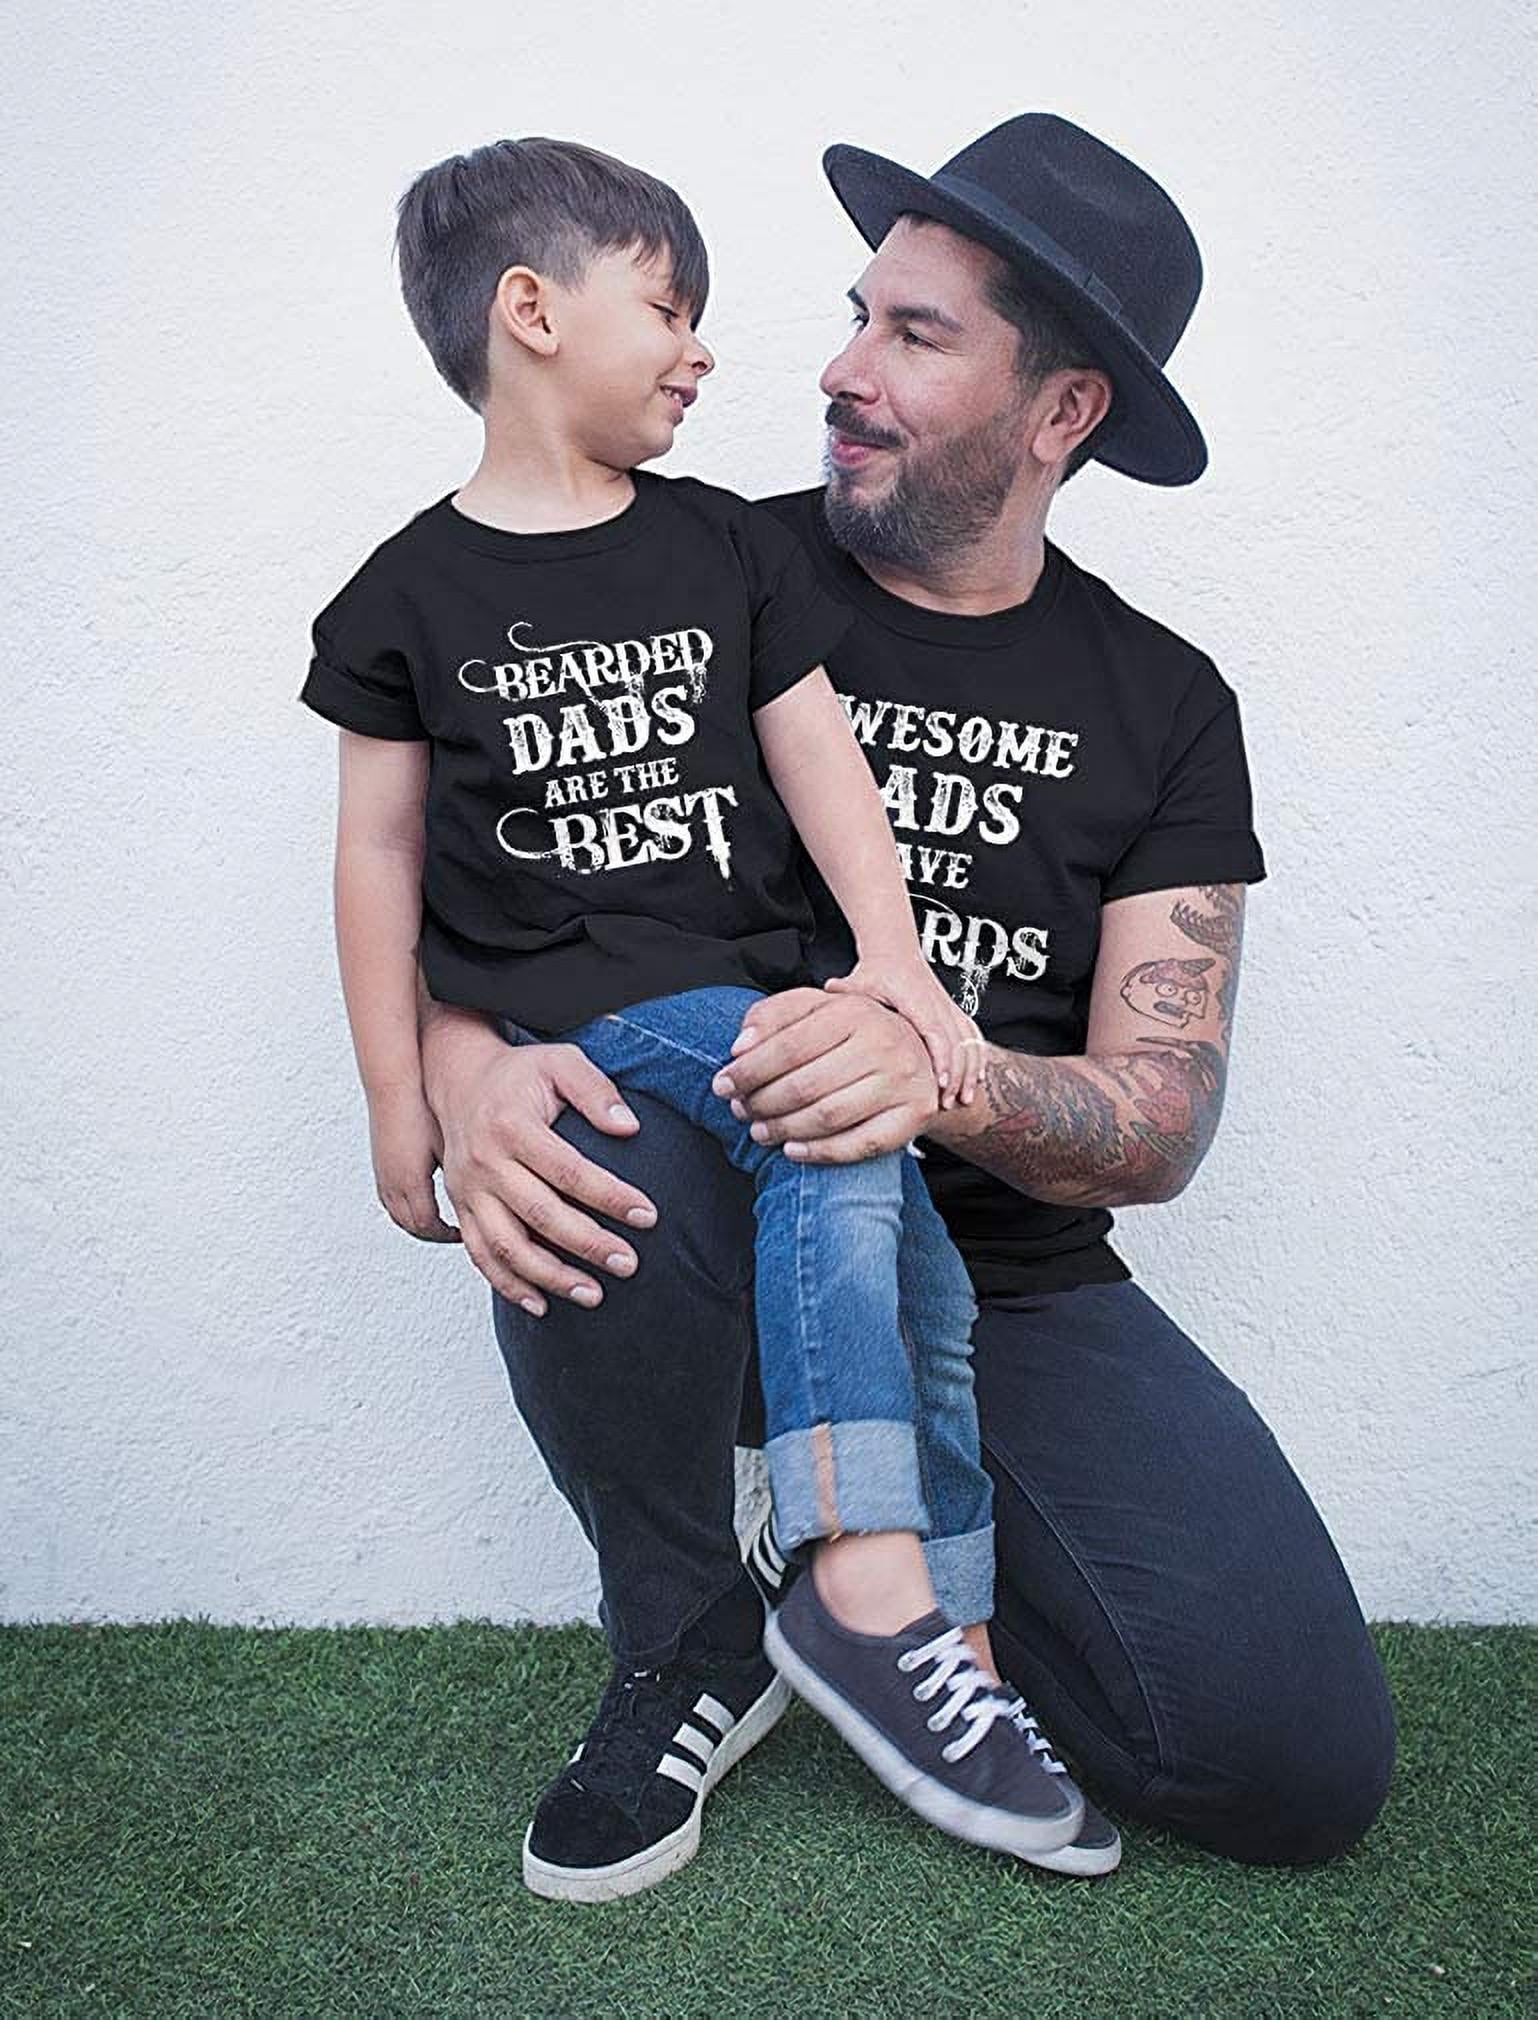 Dad tattoos hearing aid image on his head to support daughter